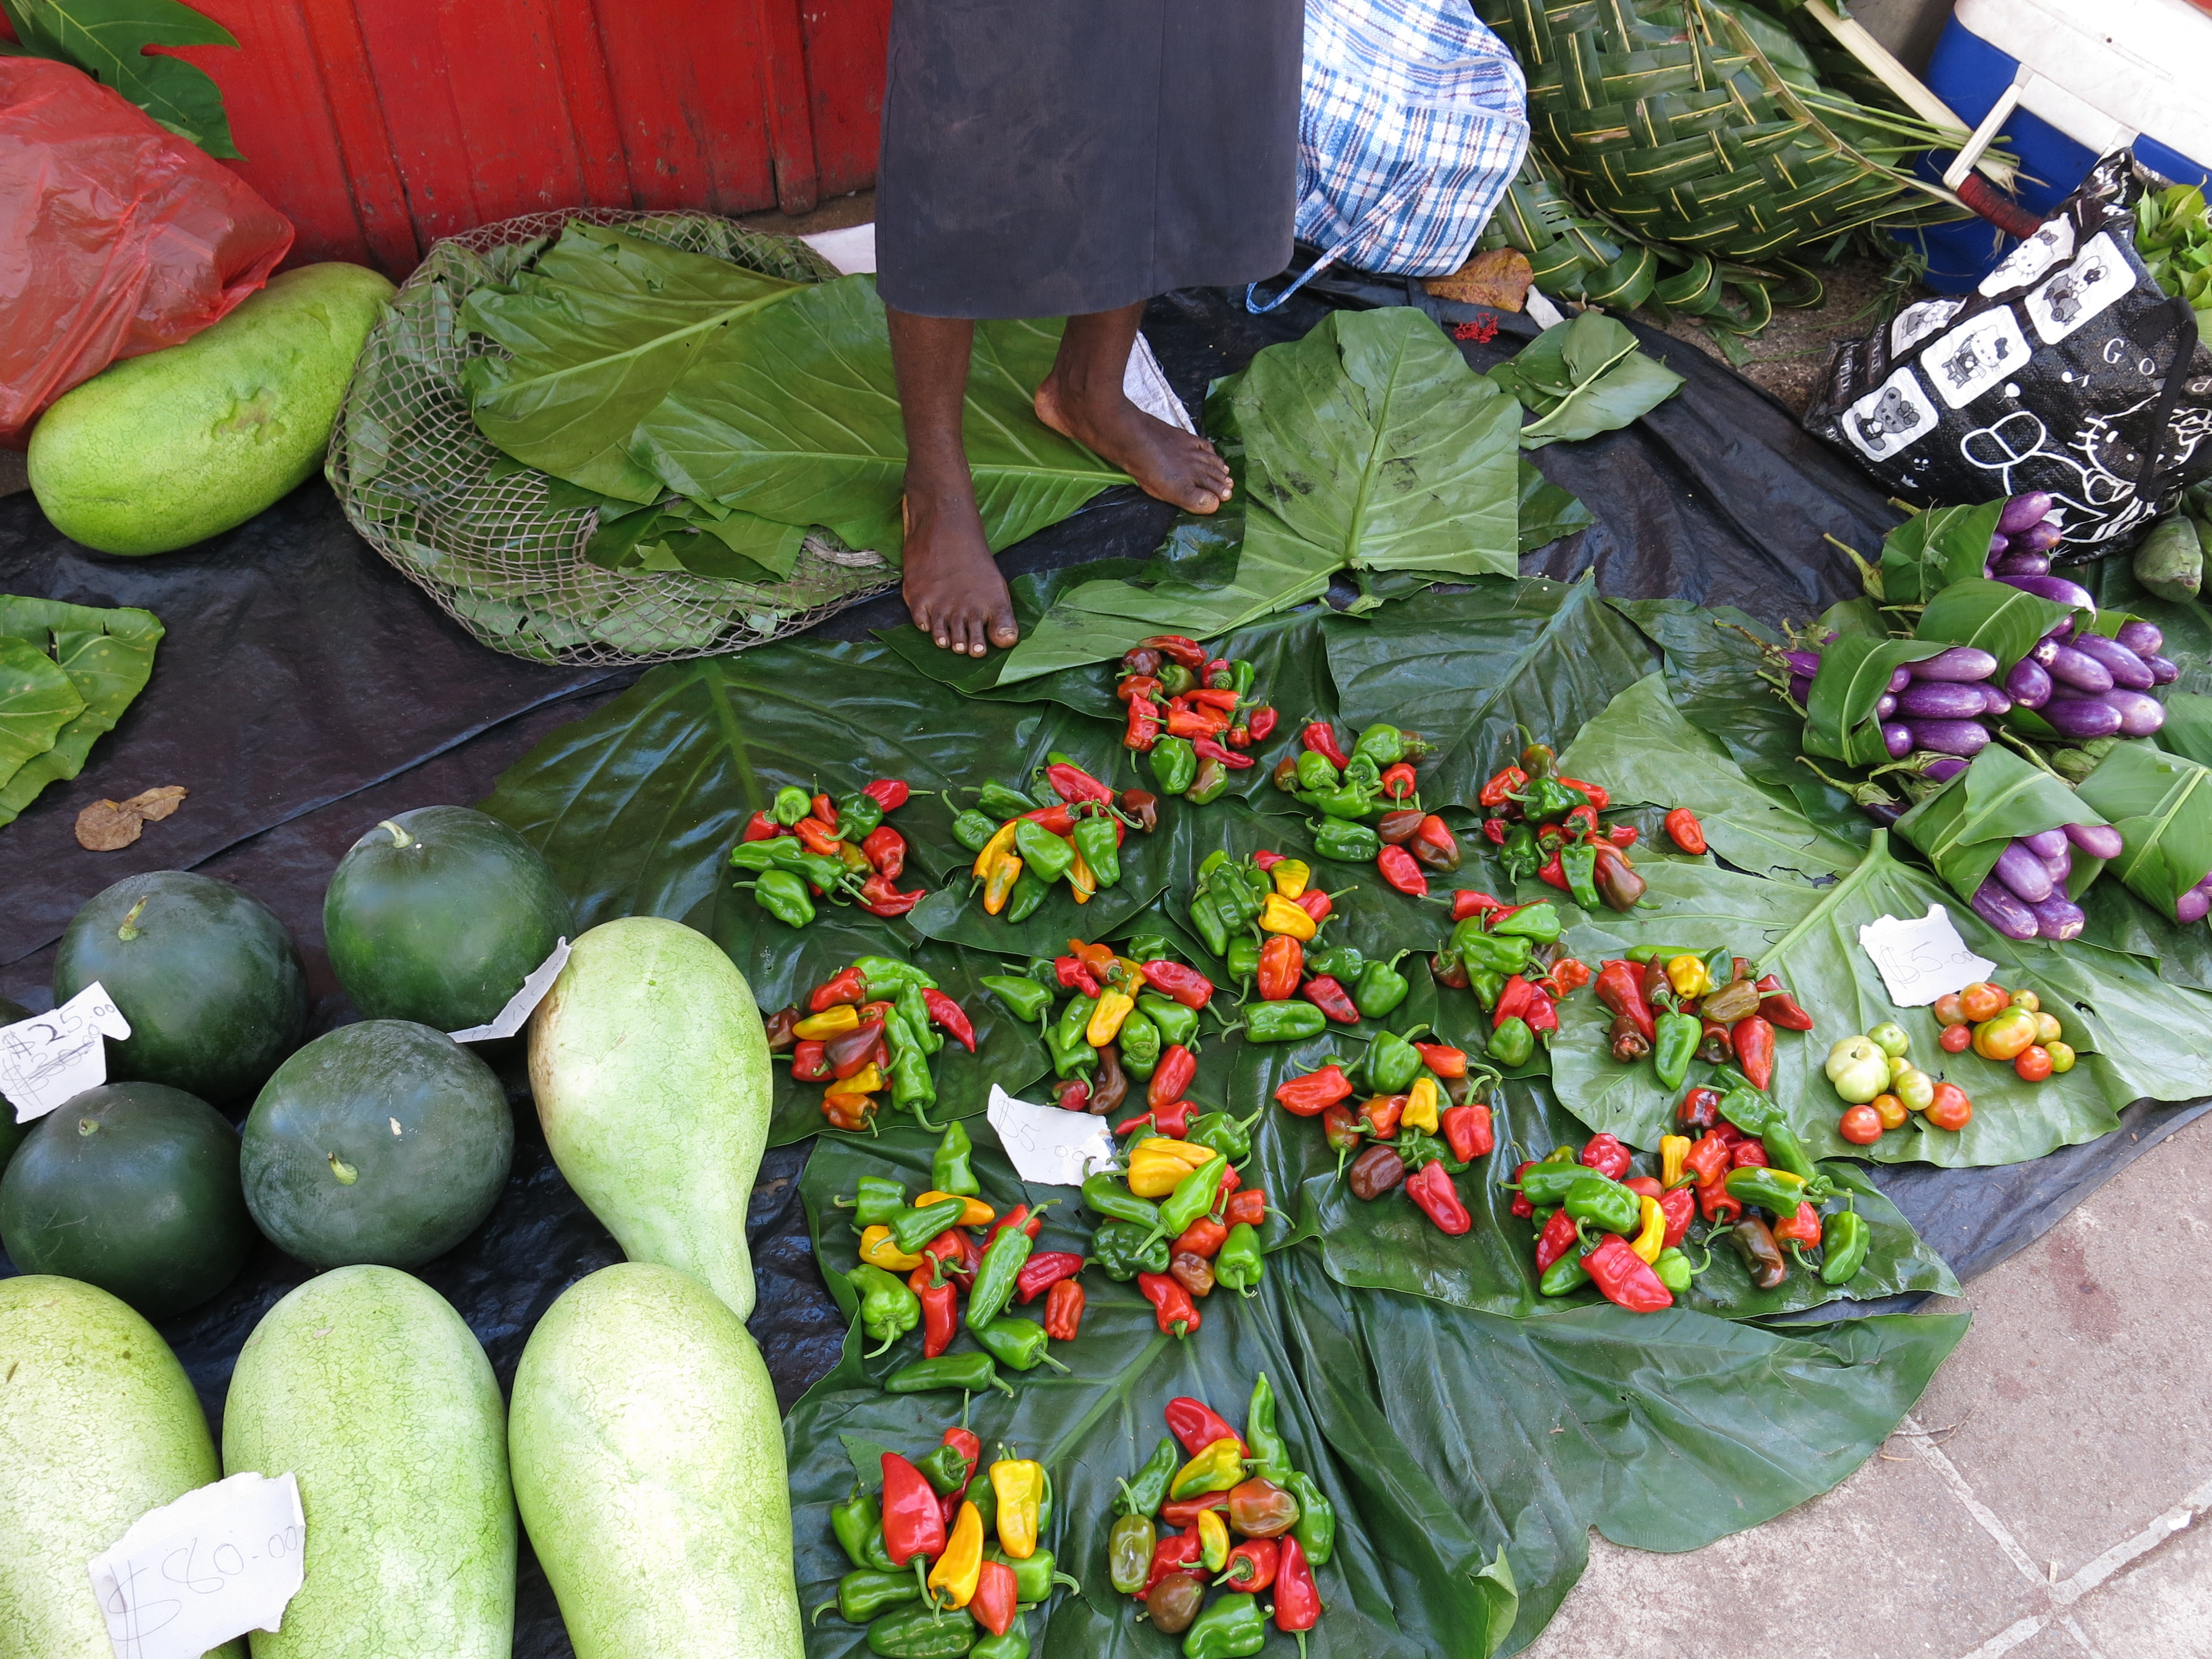 Vegetables for sale in the Gizo market